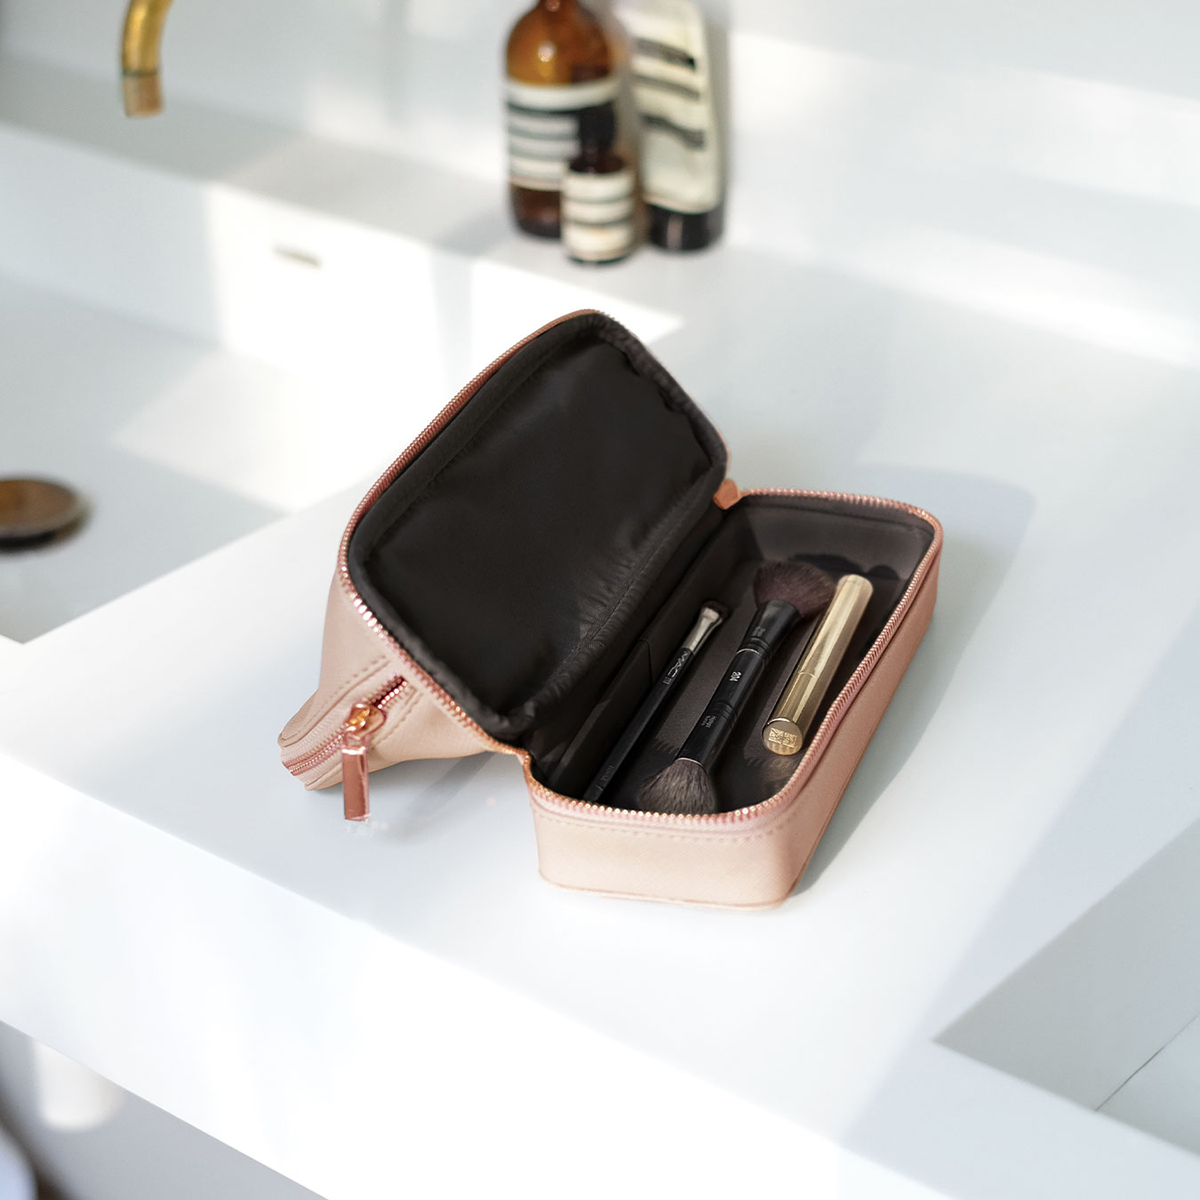 Stackers Makeup Travel Case | The Container Store